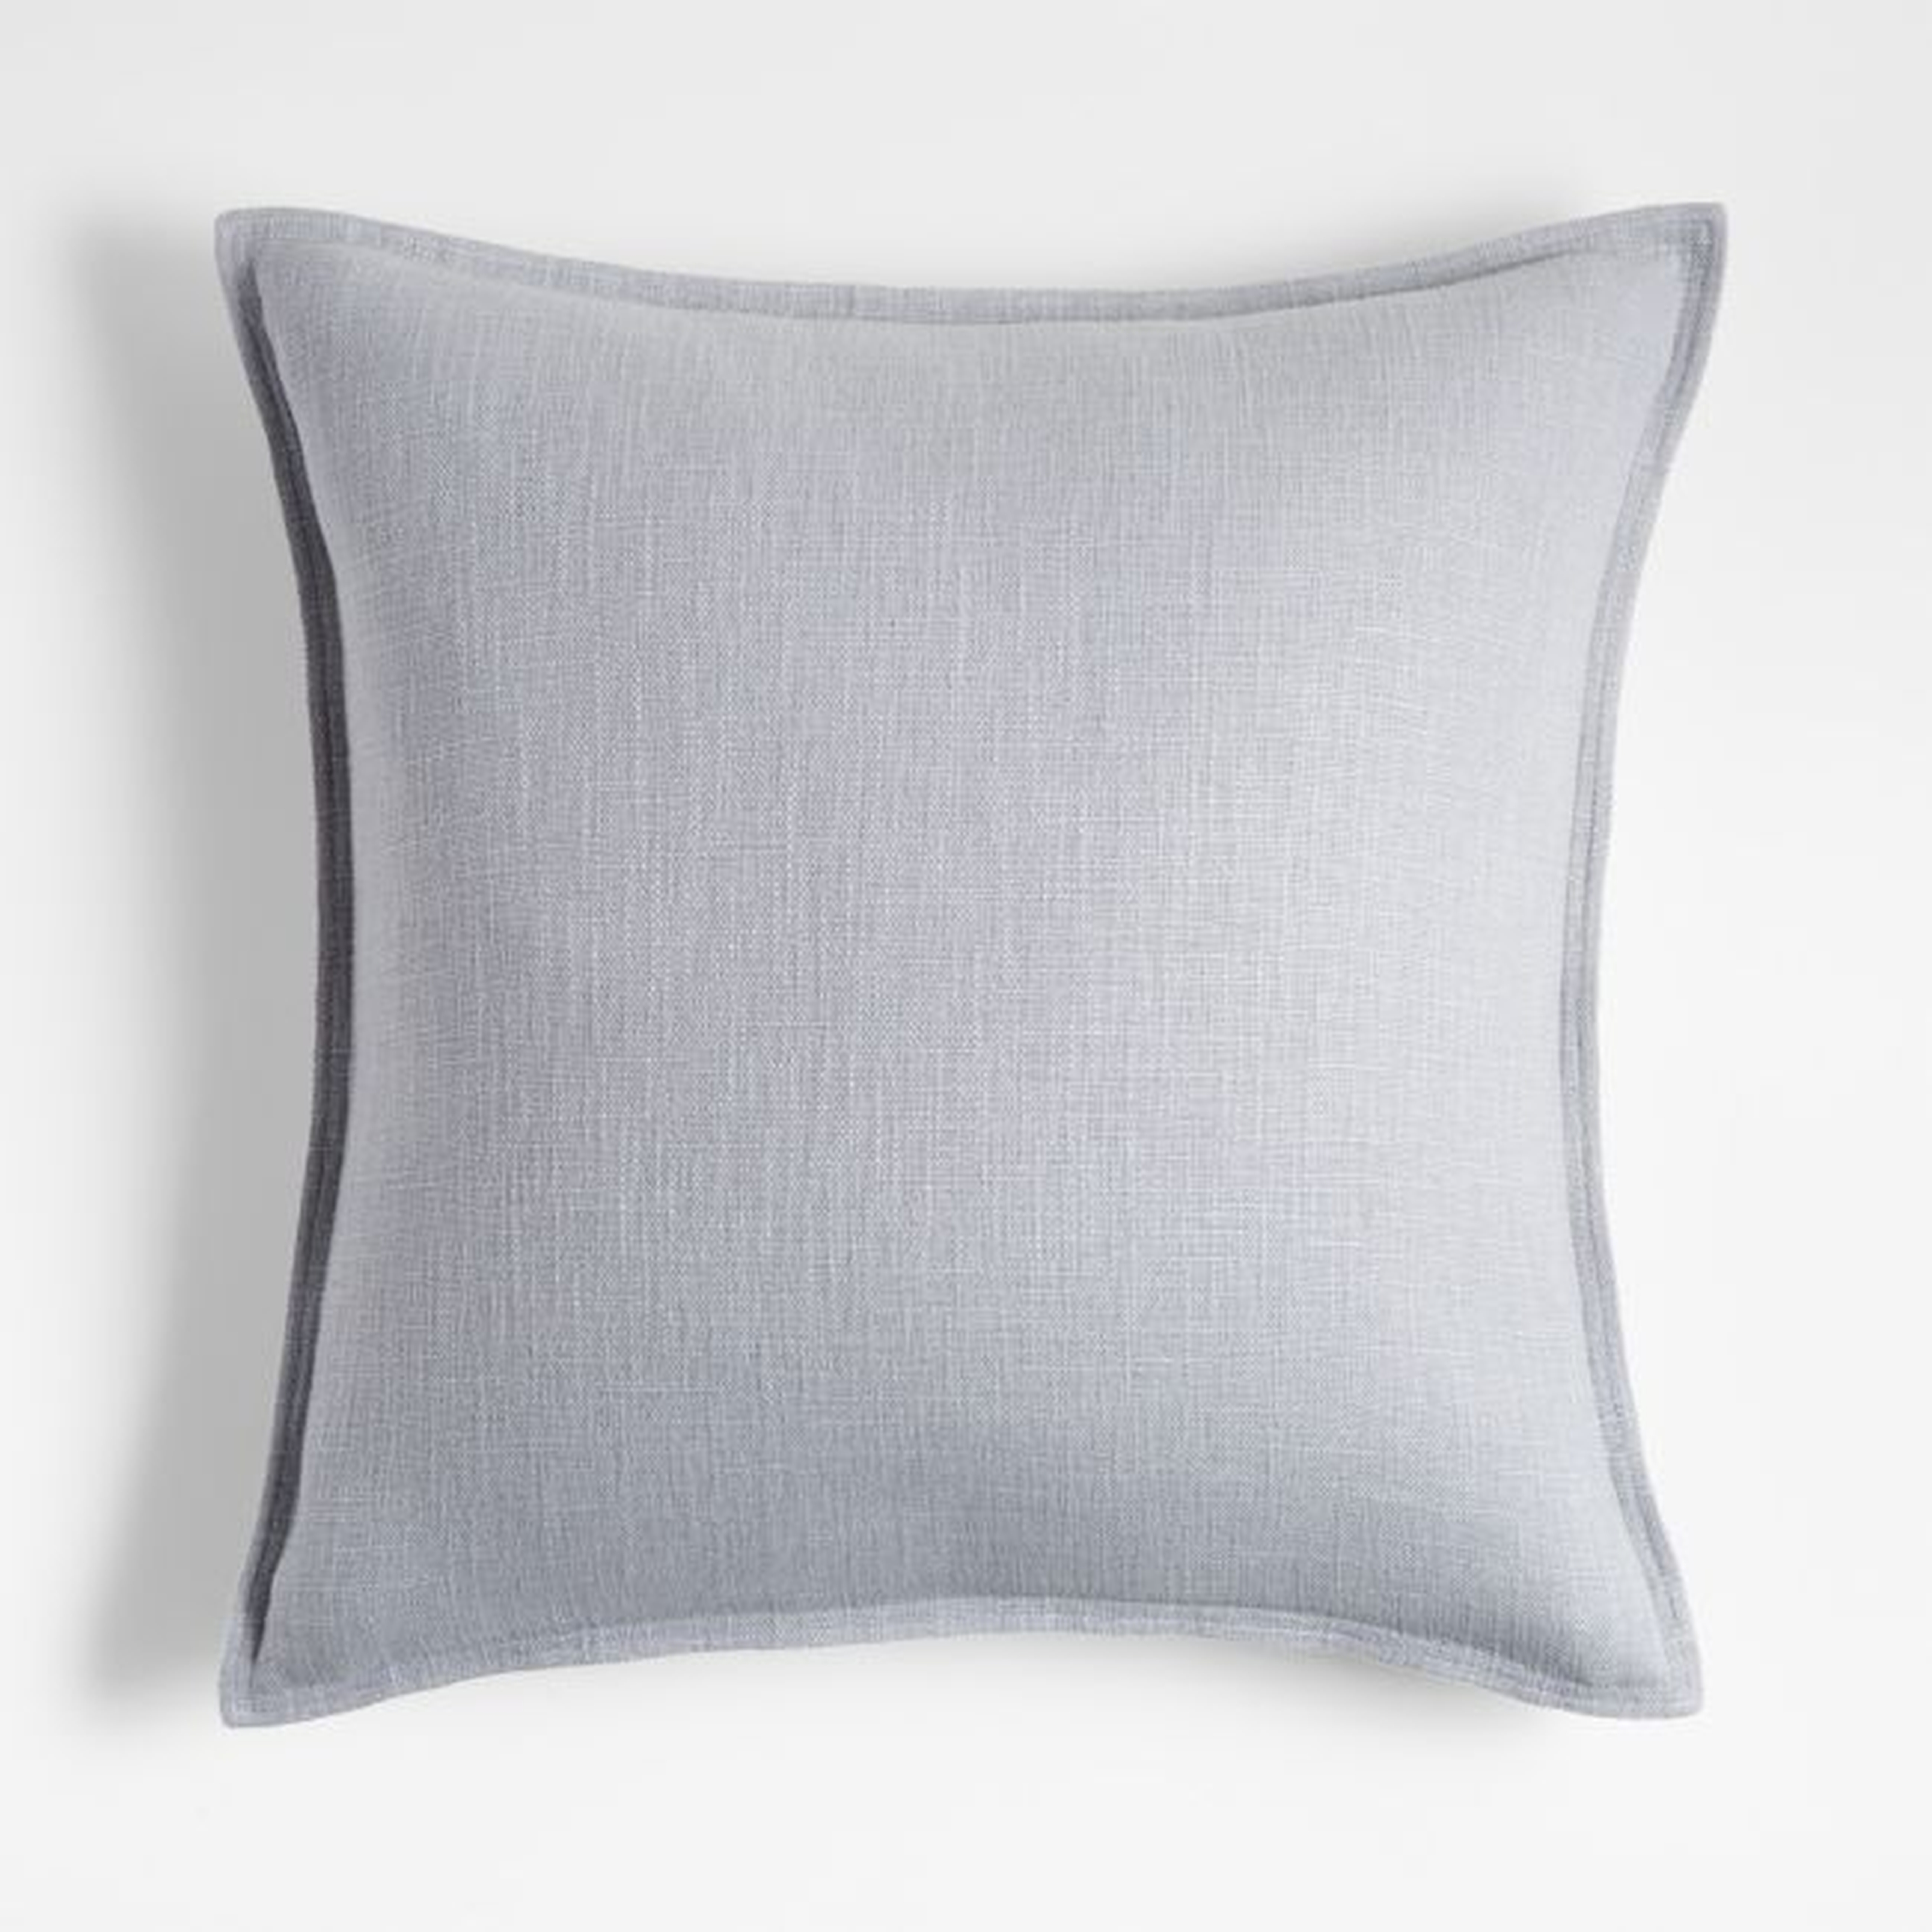 Quarry 20"x20" Laundered Linen Throw Pillow Cover - Crate and Barrel